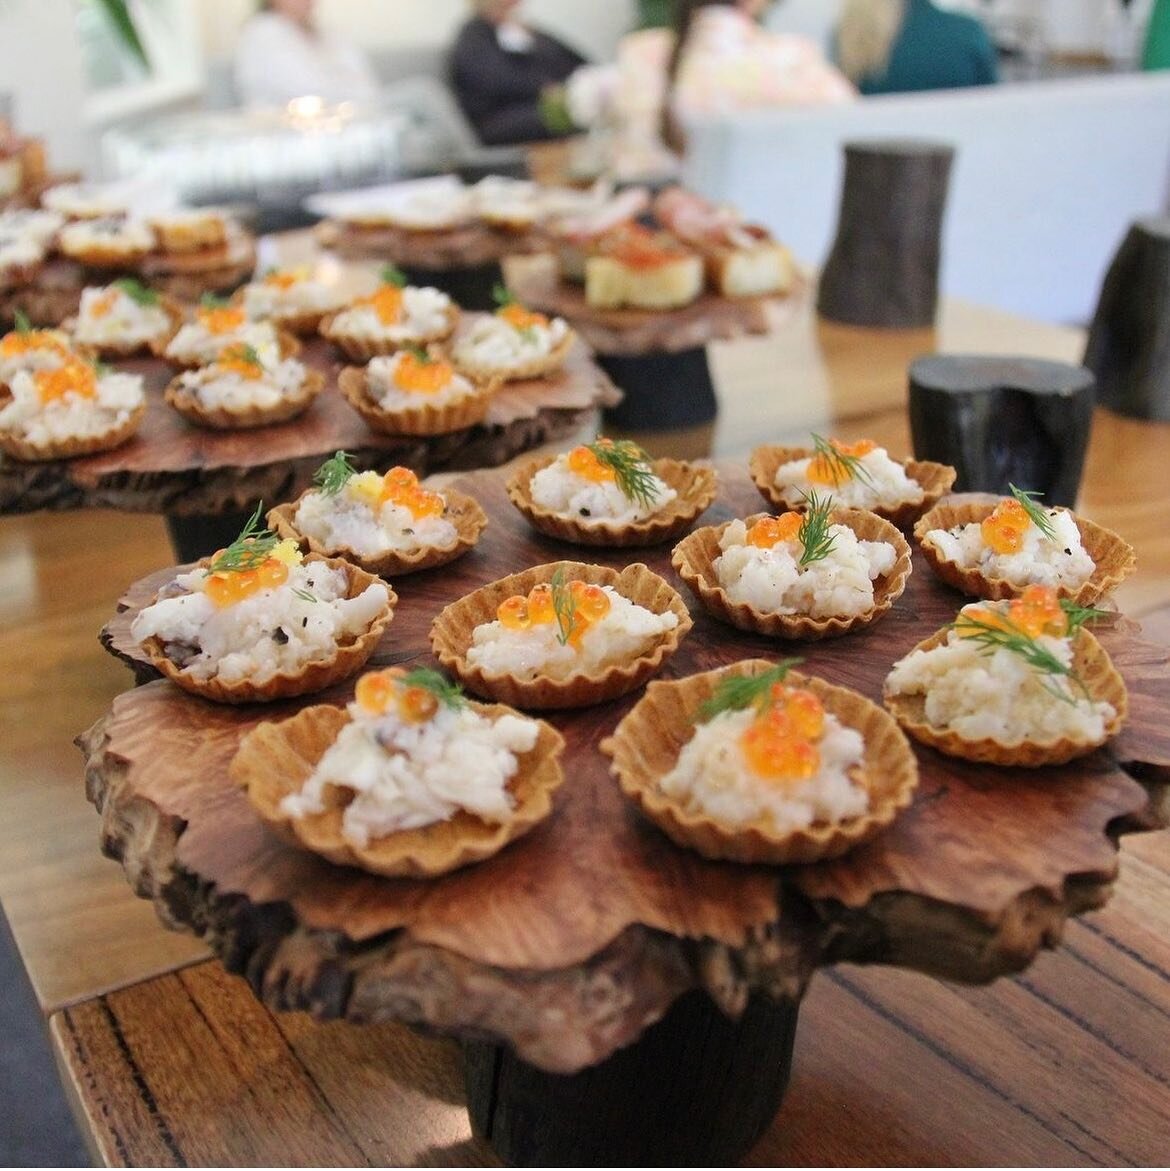 Cape Lodge was host to Women in Tourism &amp; Hospitality-WA launch of the South West. Gorgeous sweet and savouries served on our bespoke boards.